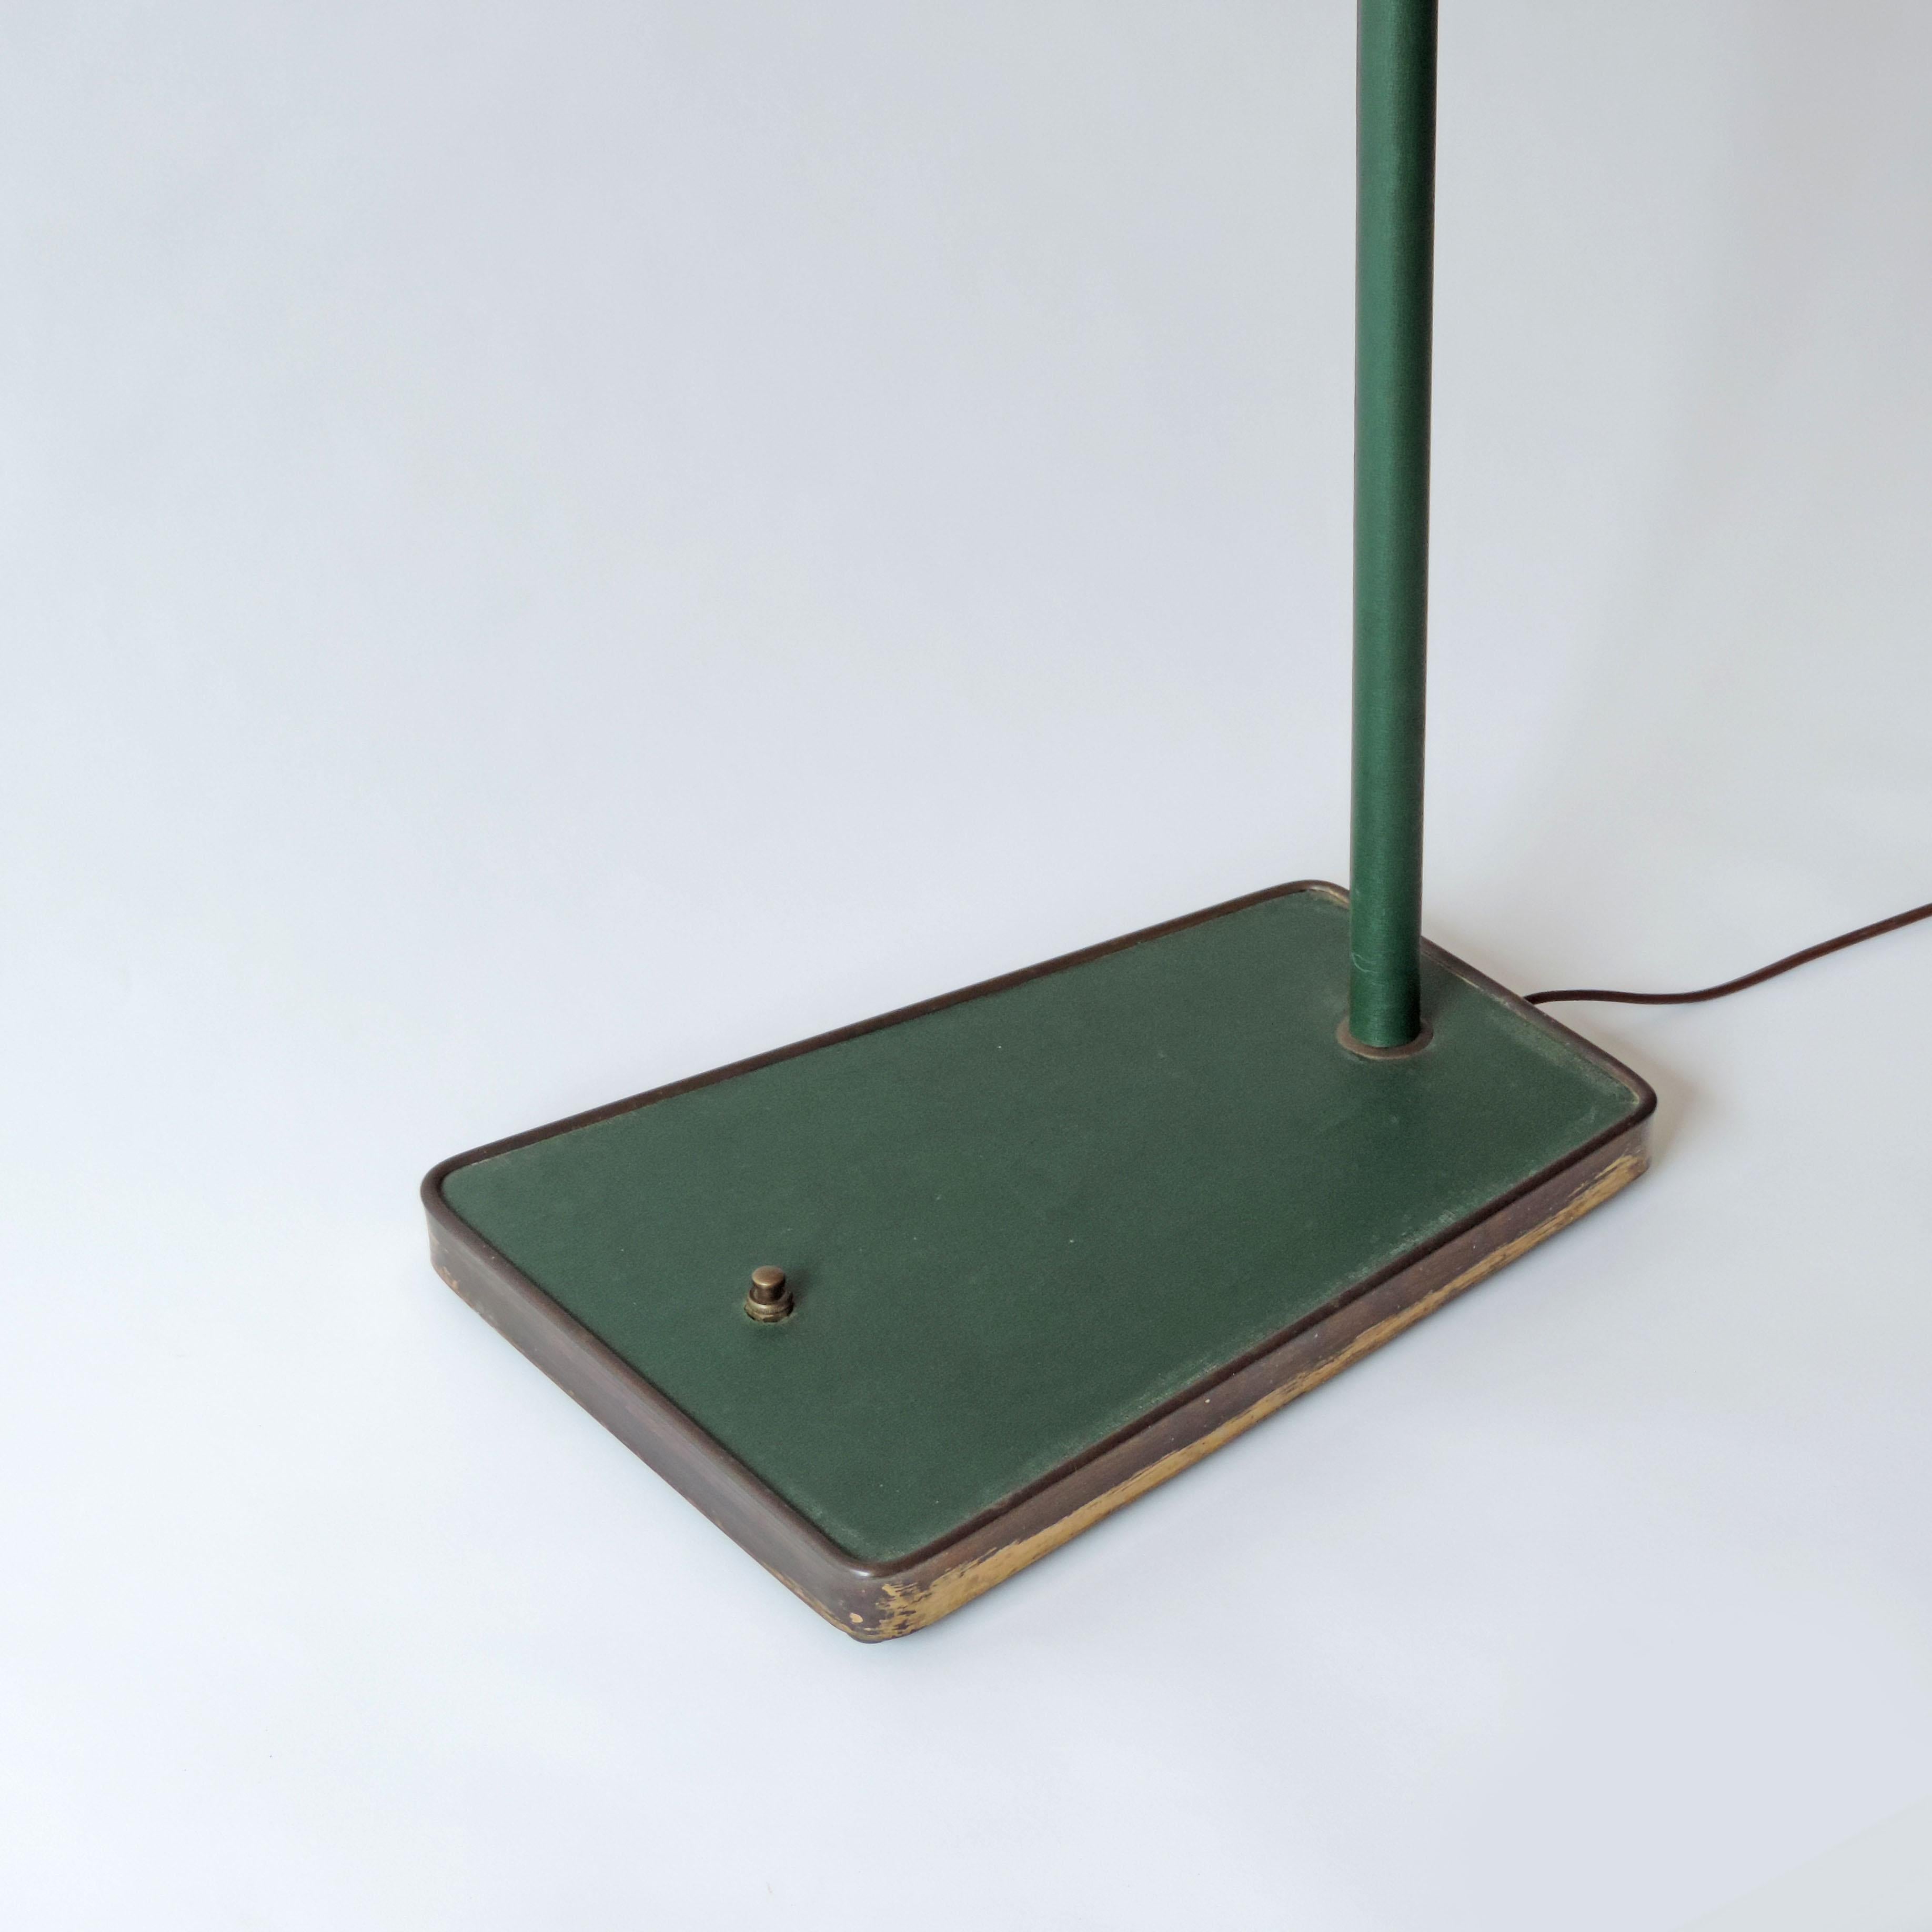 Unknown designer adjustable Italian floor lamp in brass and green faux leather, 1940s
Size varies depending on positioning.